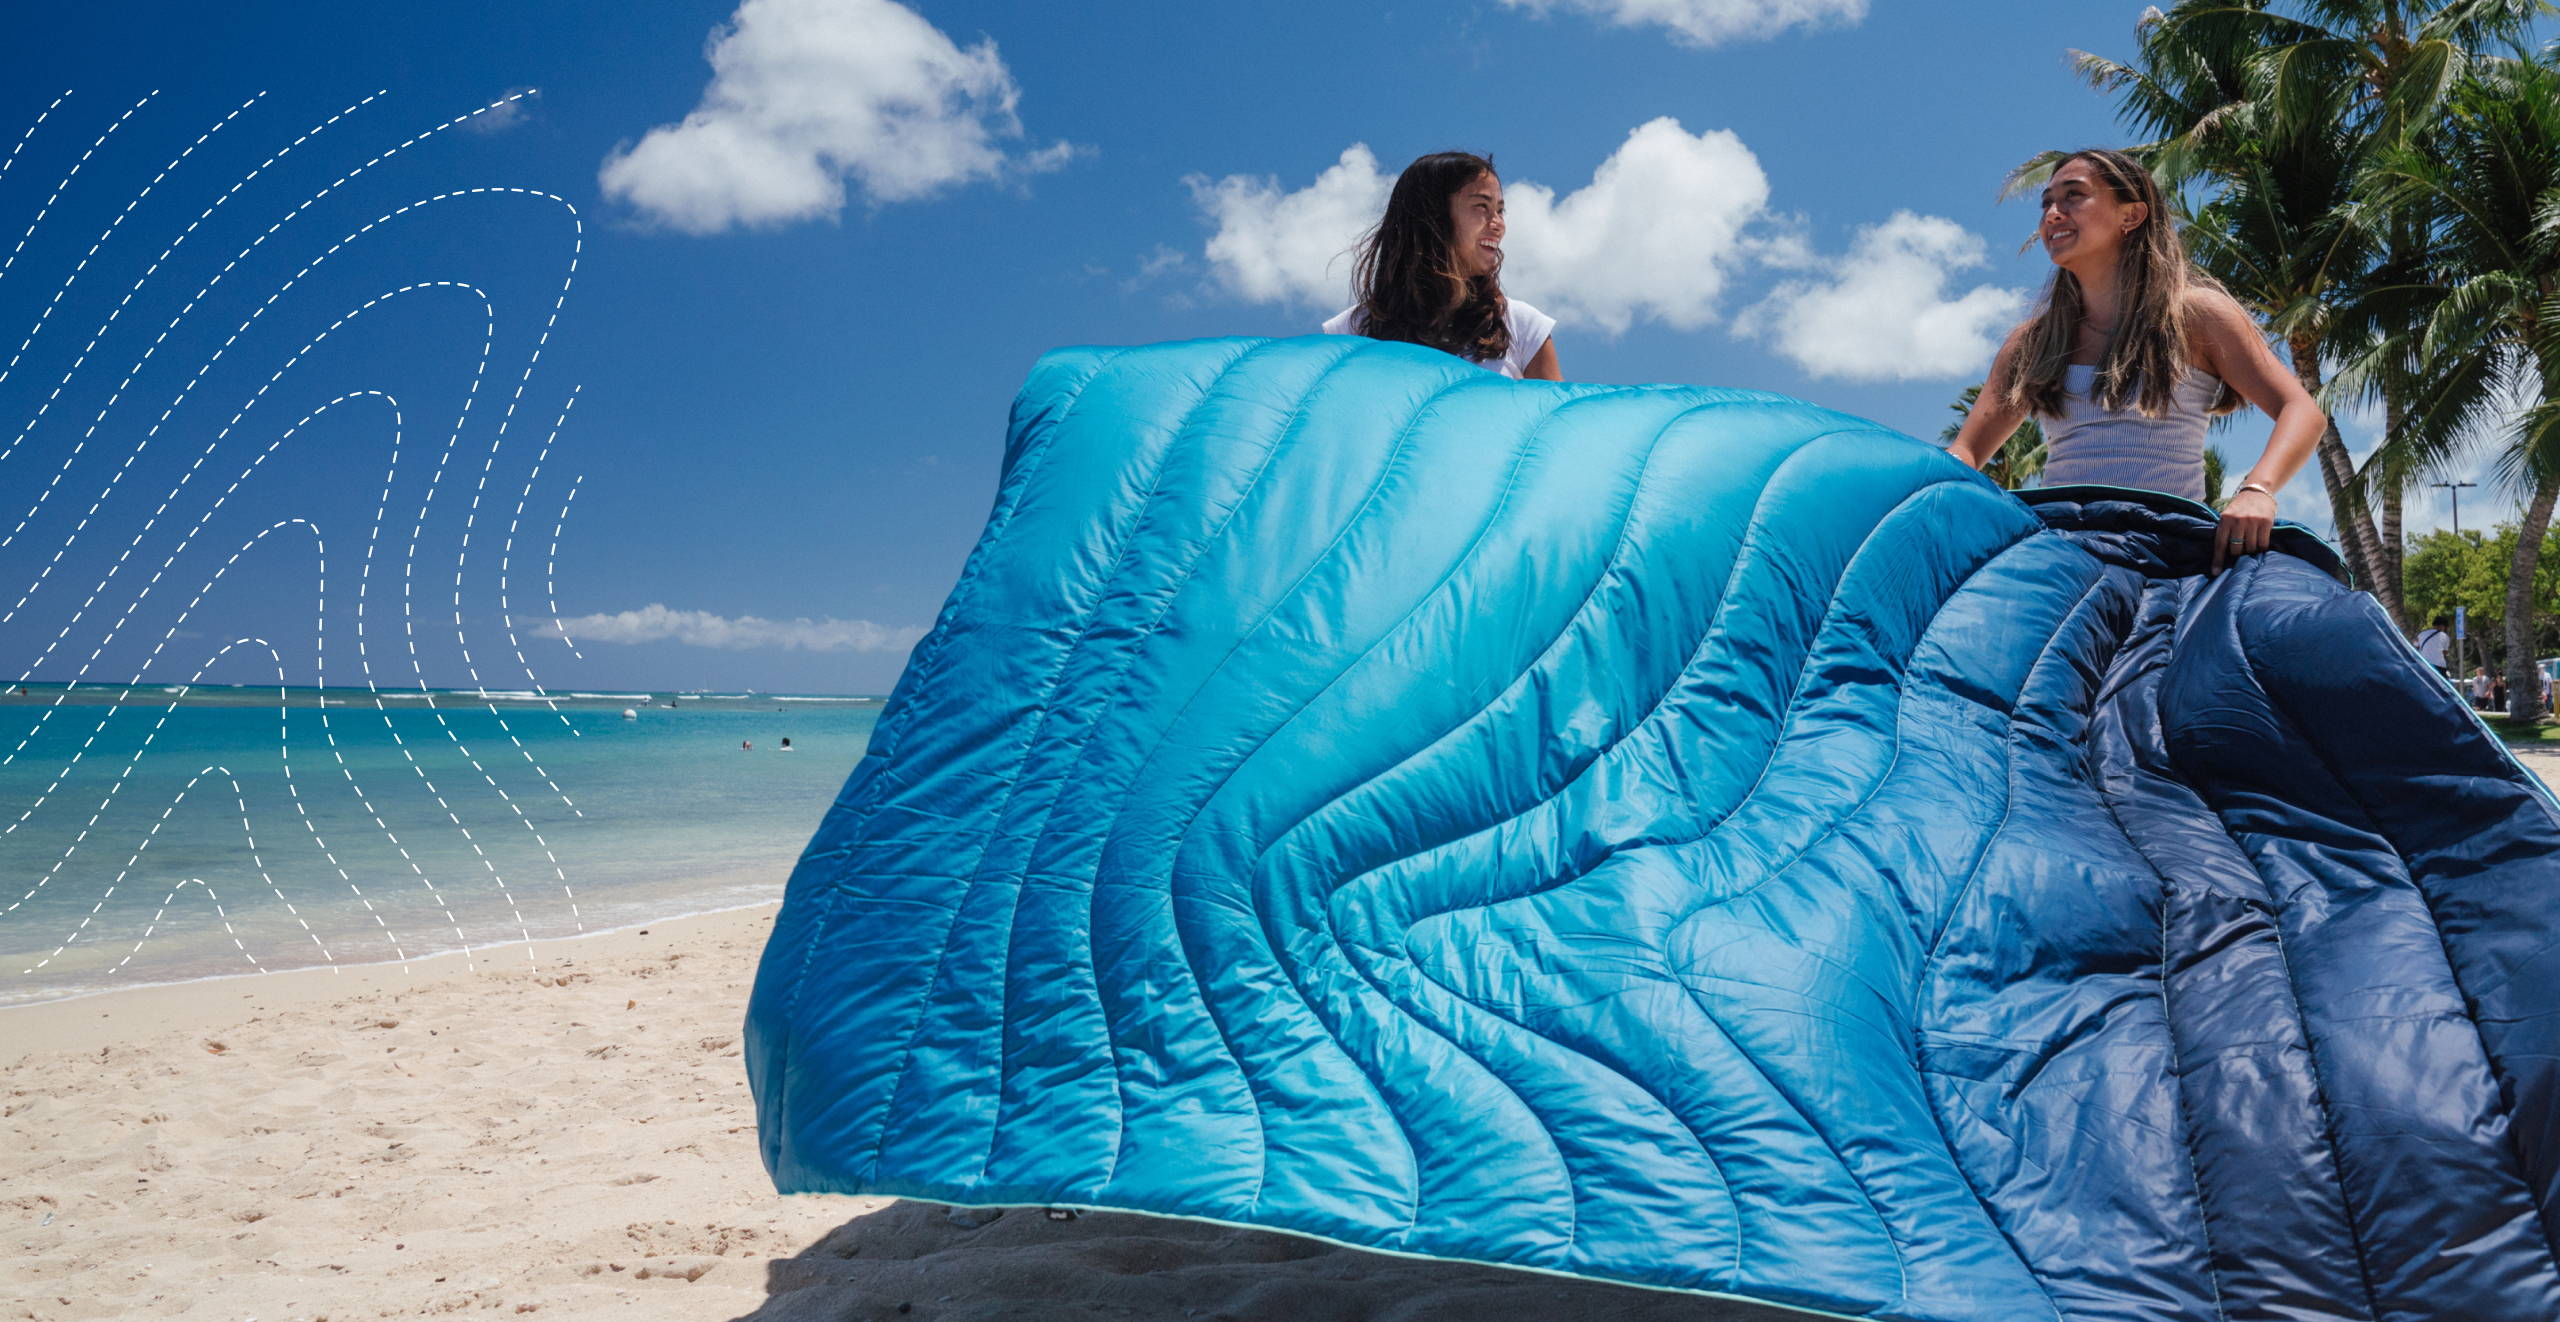 Two girls dust off a 2-person Ocean Fade beach blanket before laying it down on the sand.